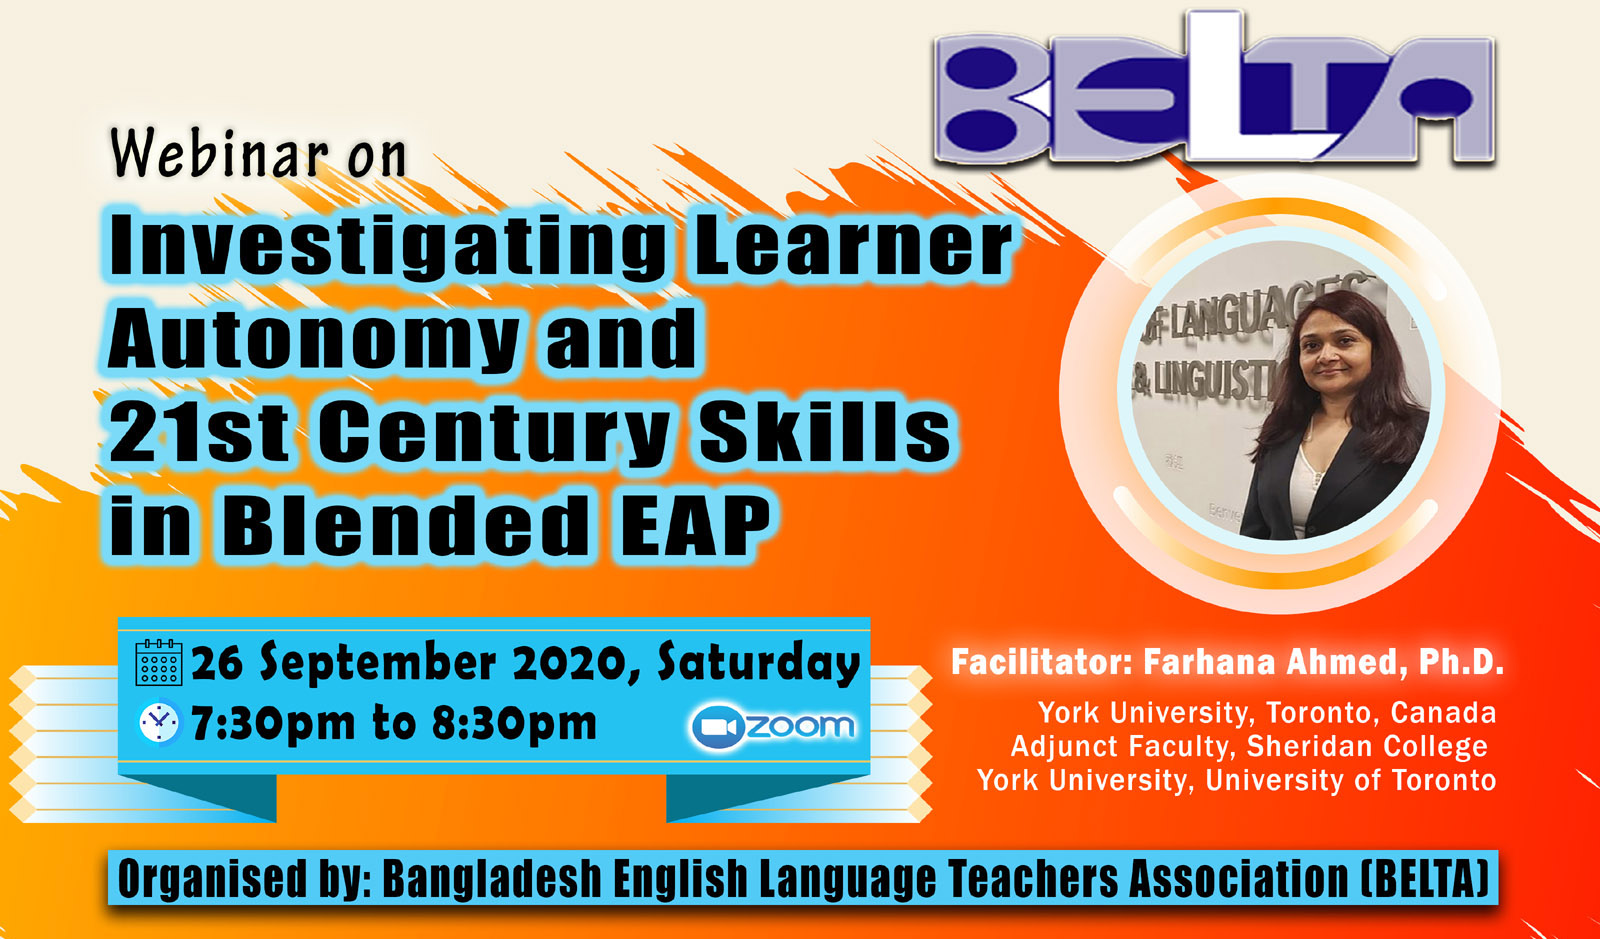 "Investigating Learner Autonomy and 21st Century Skills in Blended EAP" facilitated by Dr Farhana Ahmed